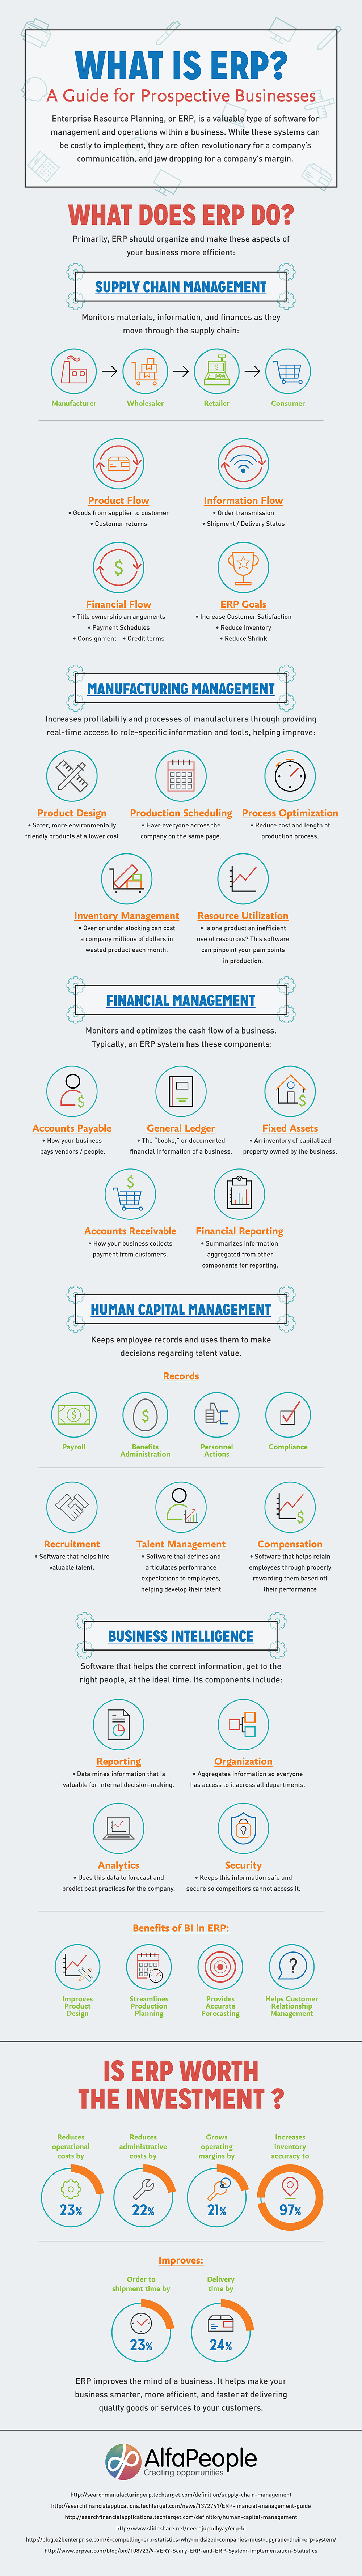 ERP Infographic from AlfaPeople